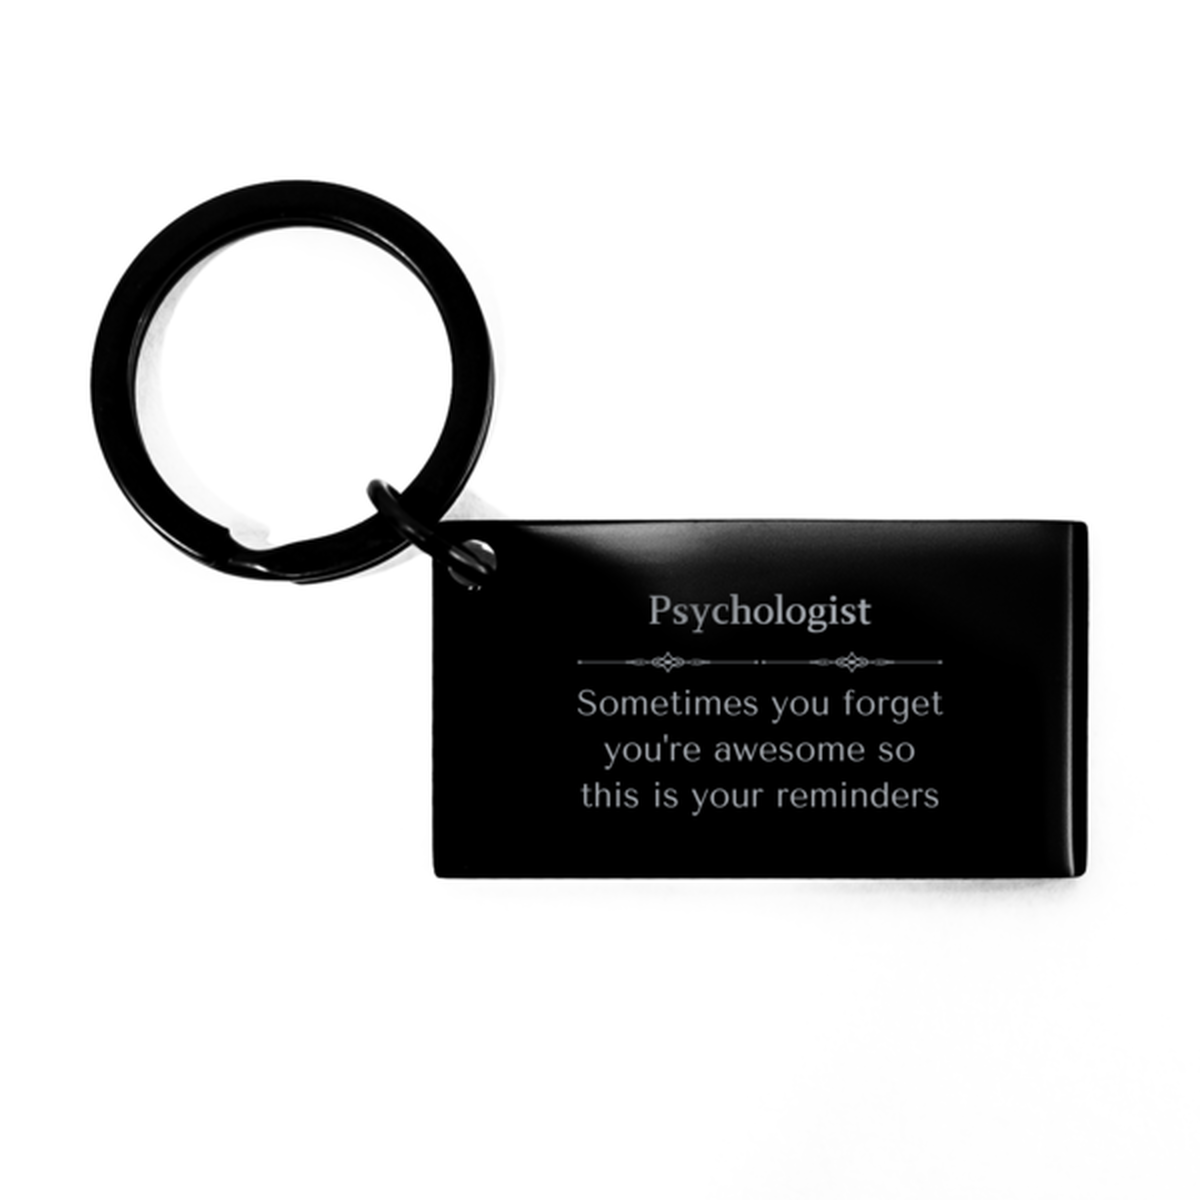 Sentimental Psychologist Keychain, Streetcar Operator Sometimes you forget you're awesome so this is your reminders, Graduation Christmas Birthday Gifts for Psychologist, Men, Women, Coworkers